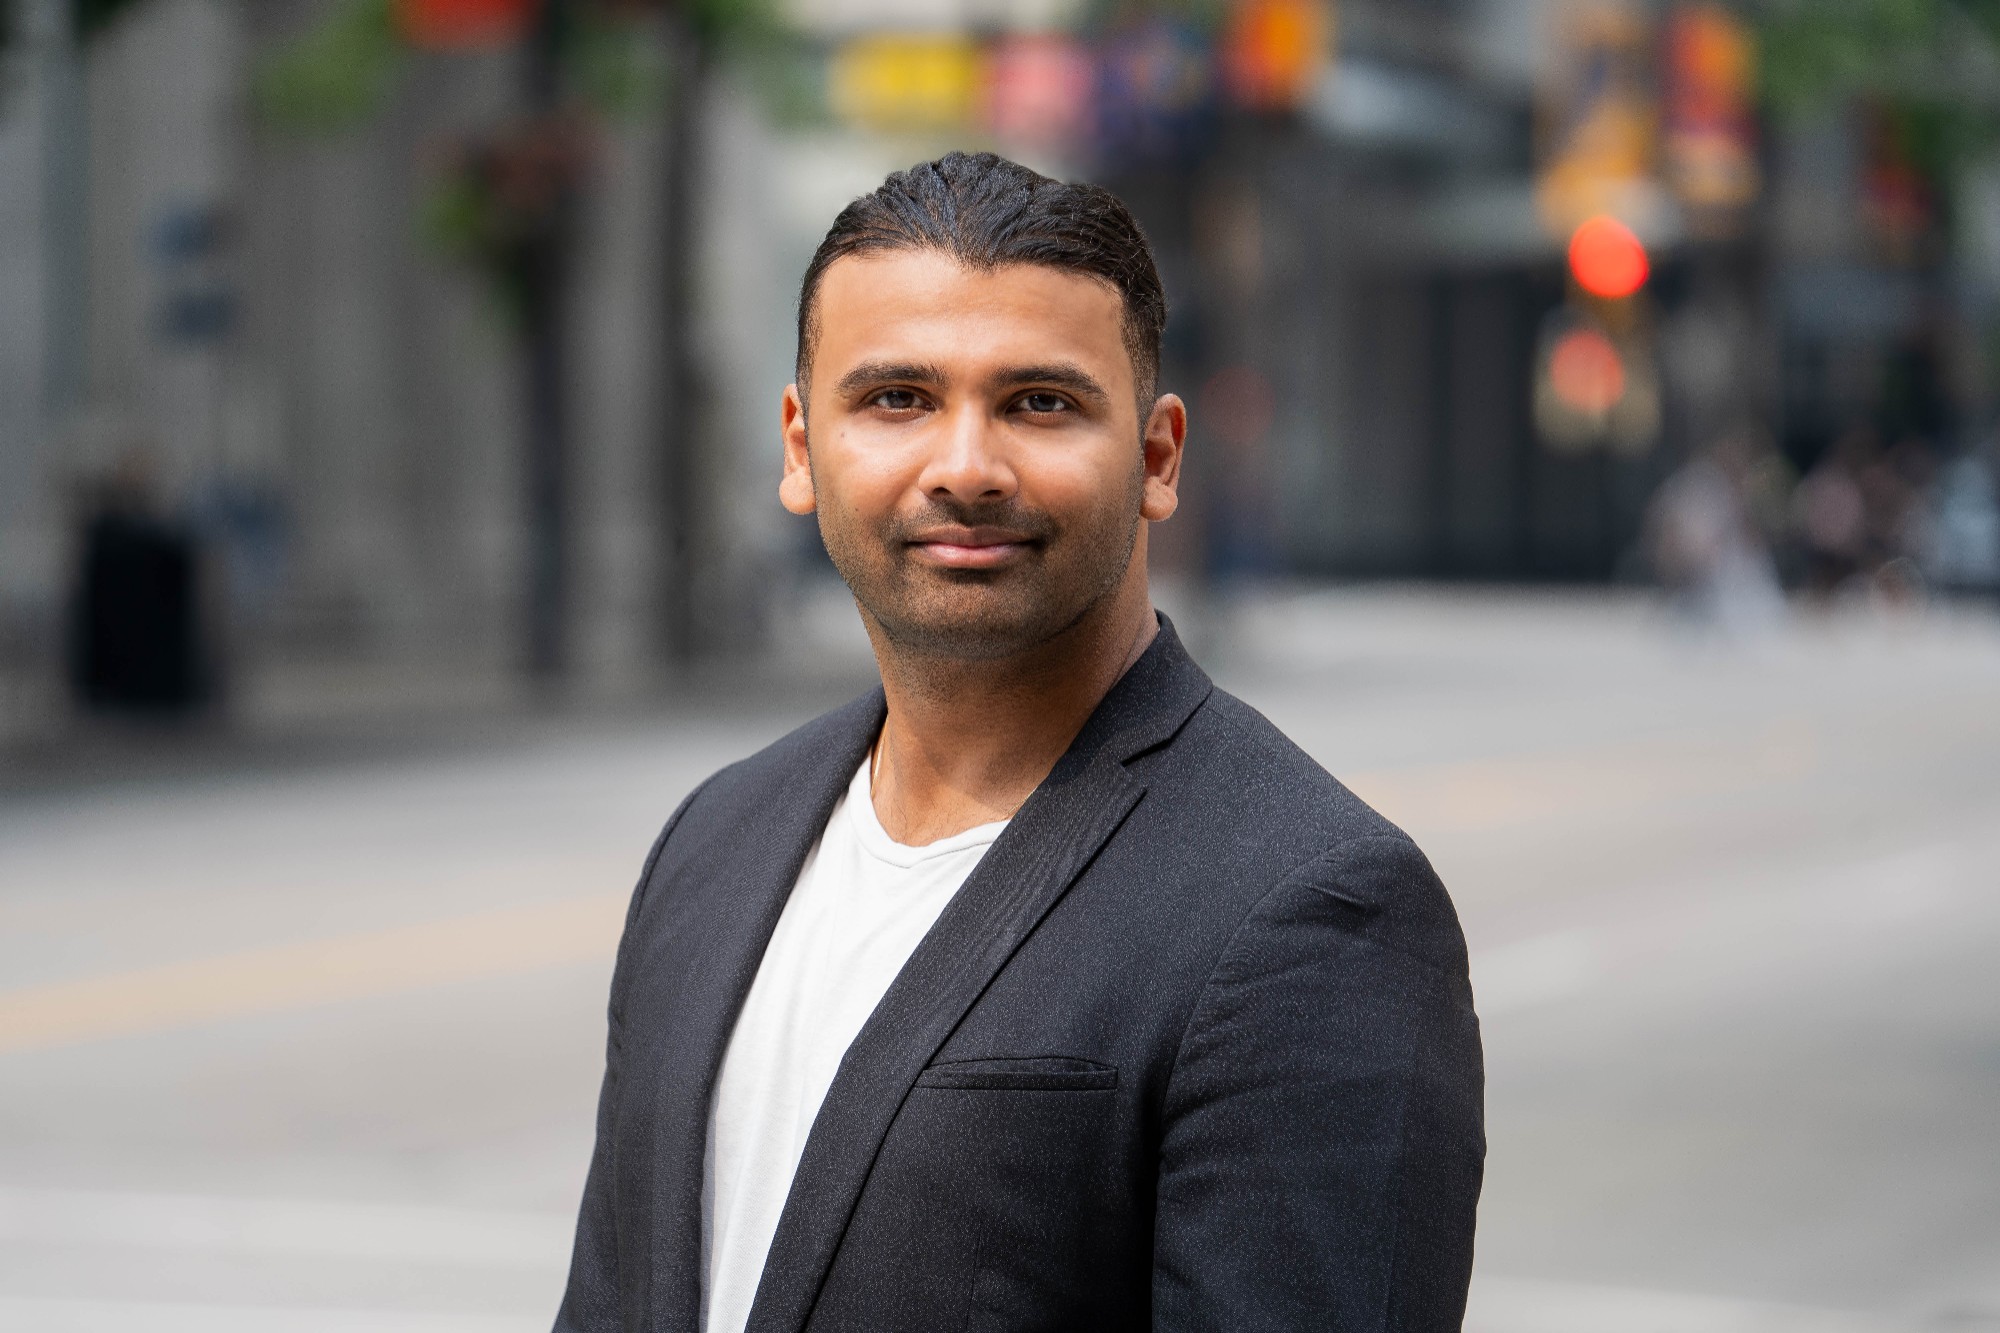 Portrait of Dr. Ali Bhagat, Director of SFU School of Public Policy Minor, with a background of an urban street.